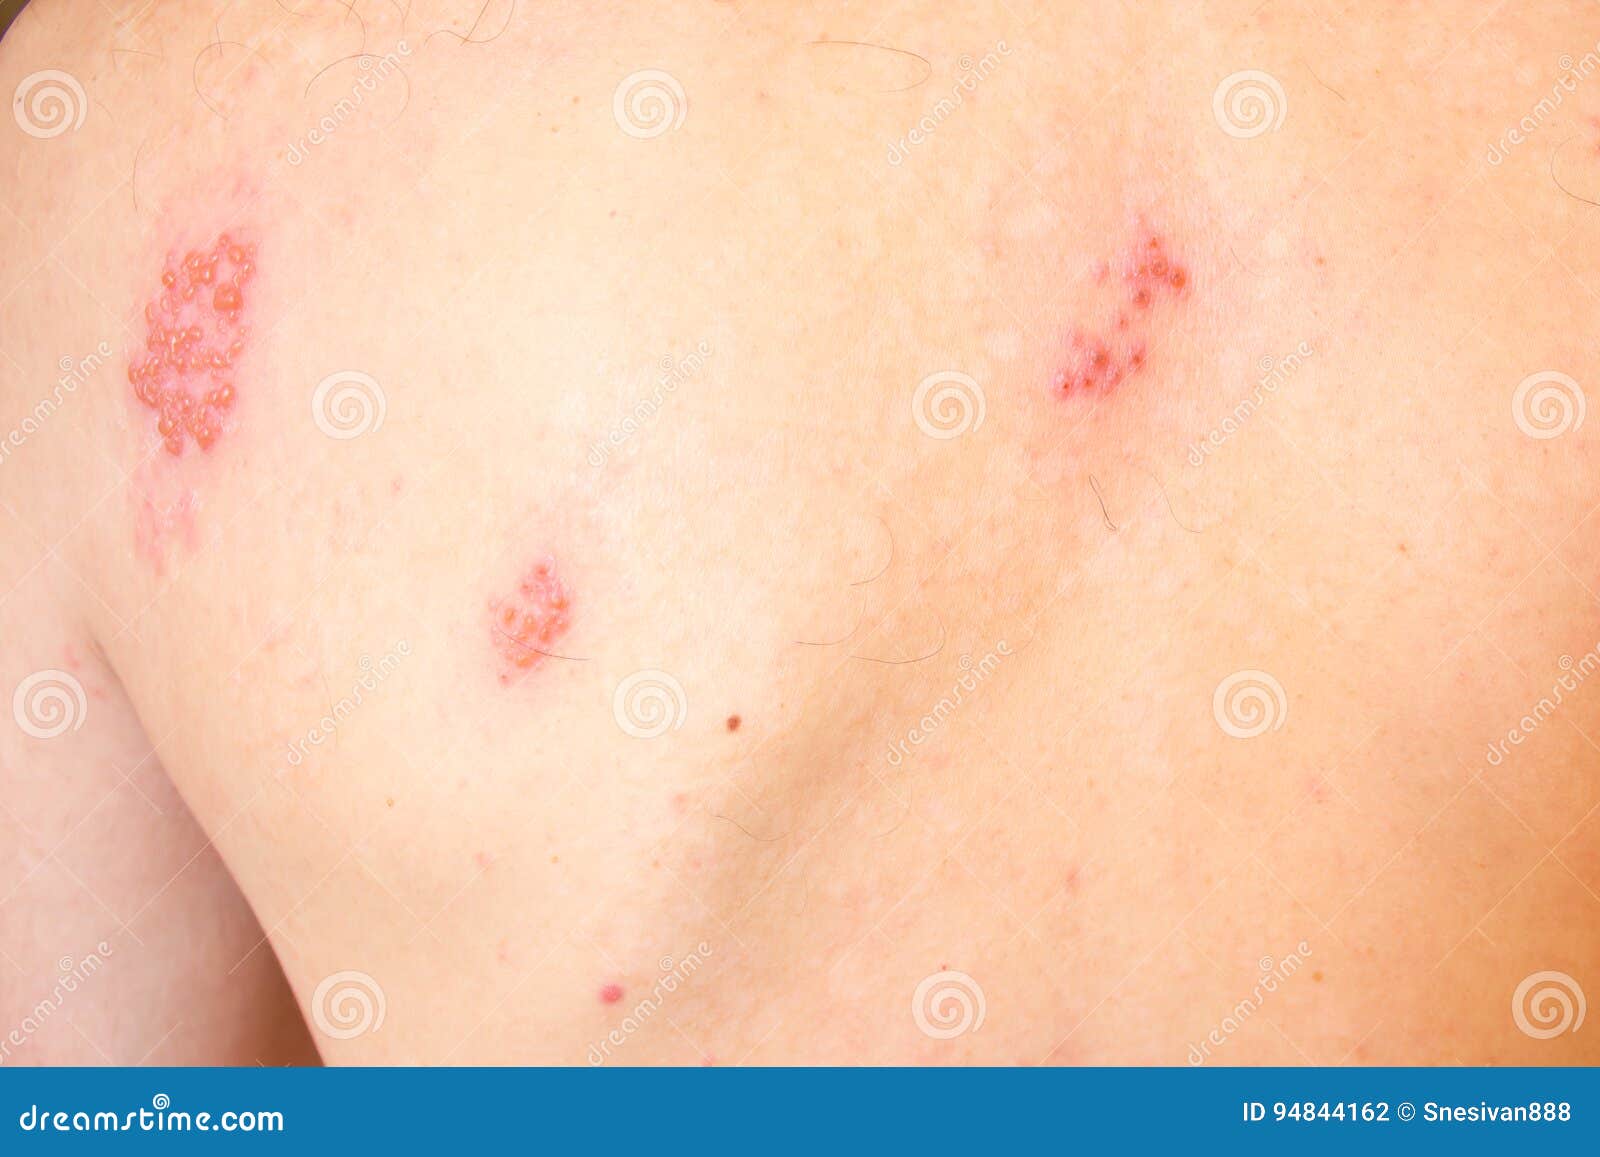 shingles on men herpes zoster. closeup.